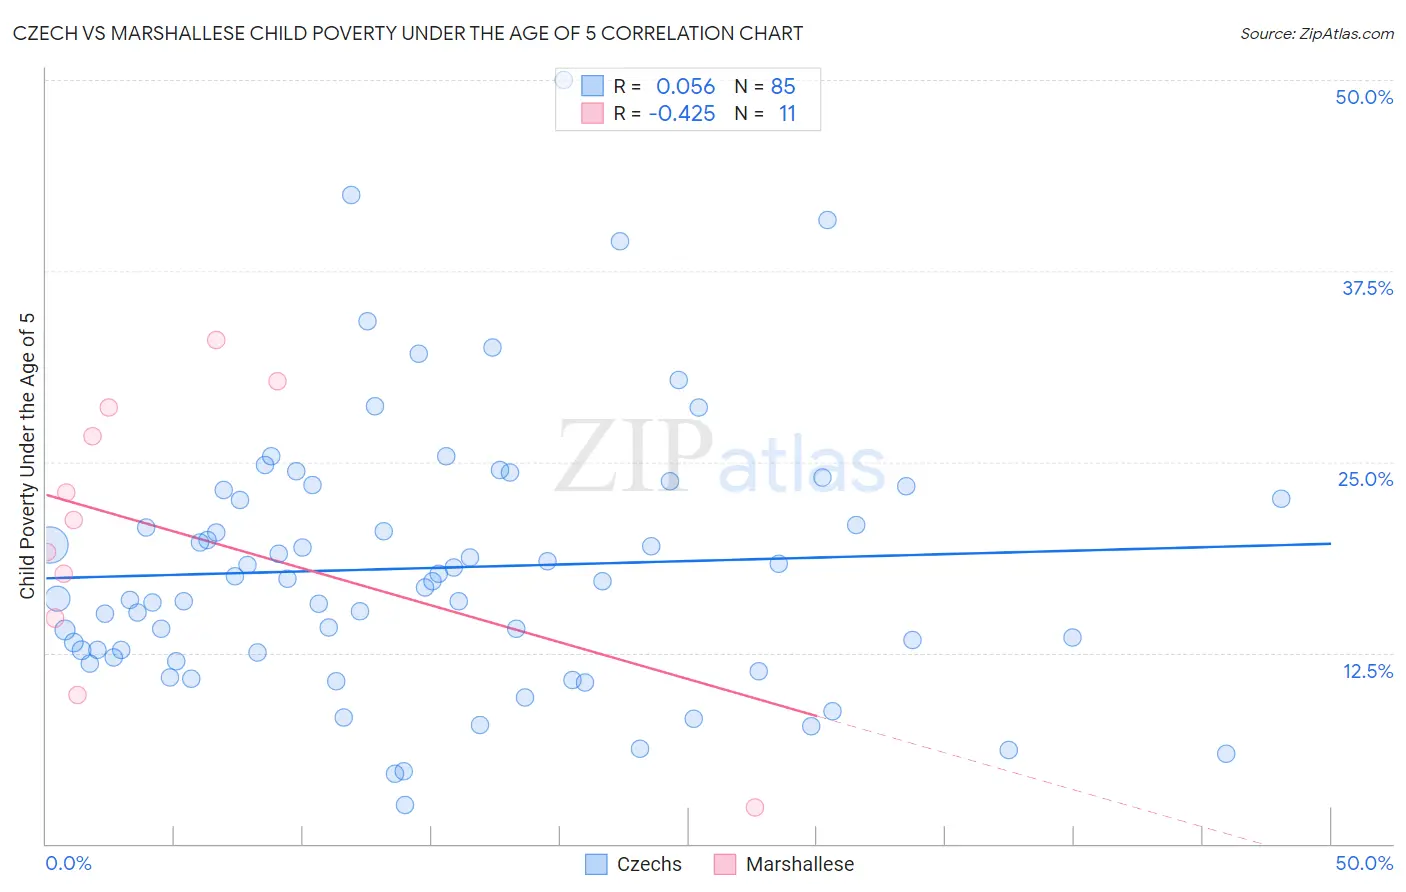 Czech vs Marshallese Child Poverty Under the Age of 5